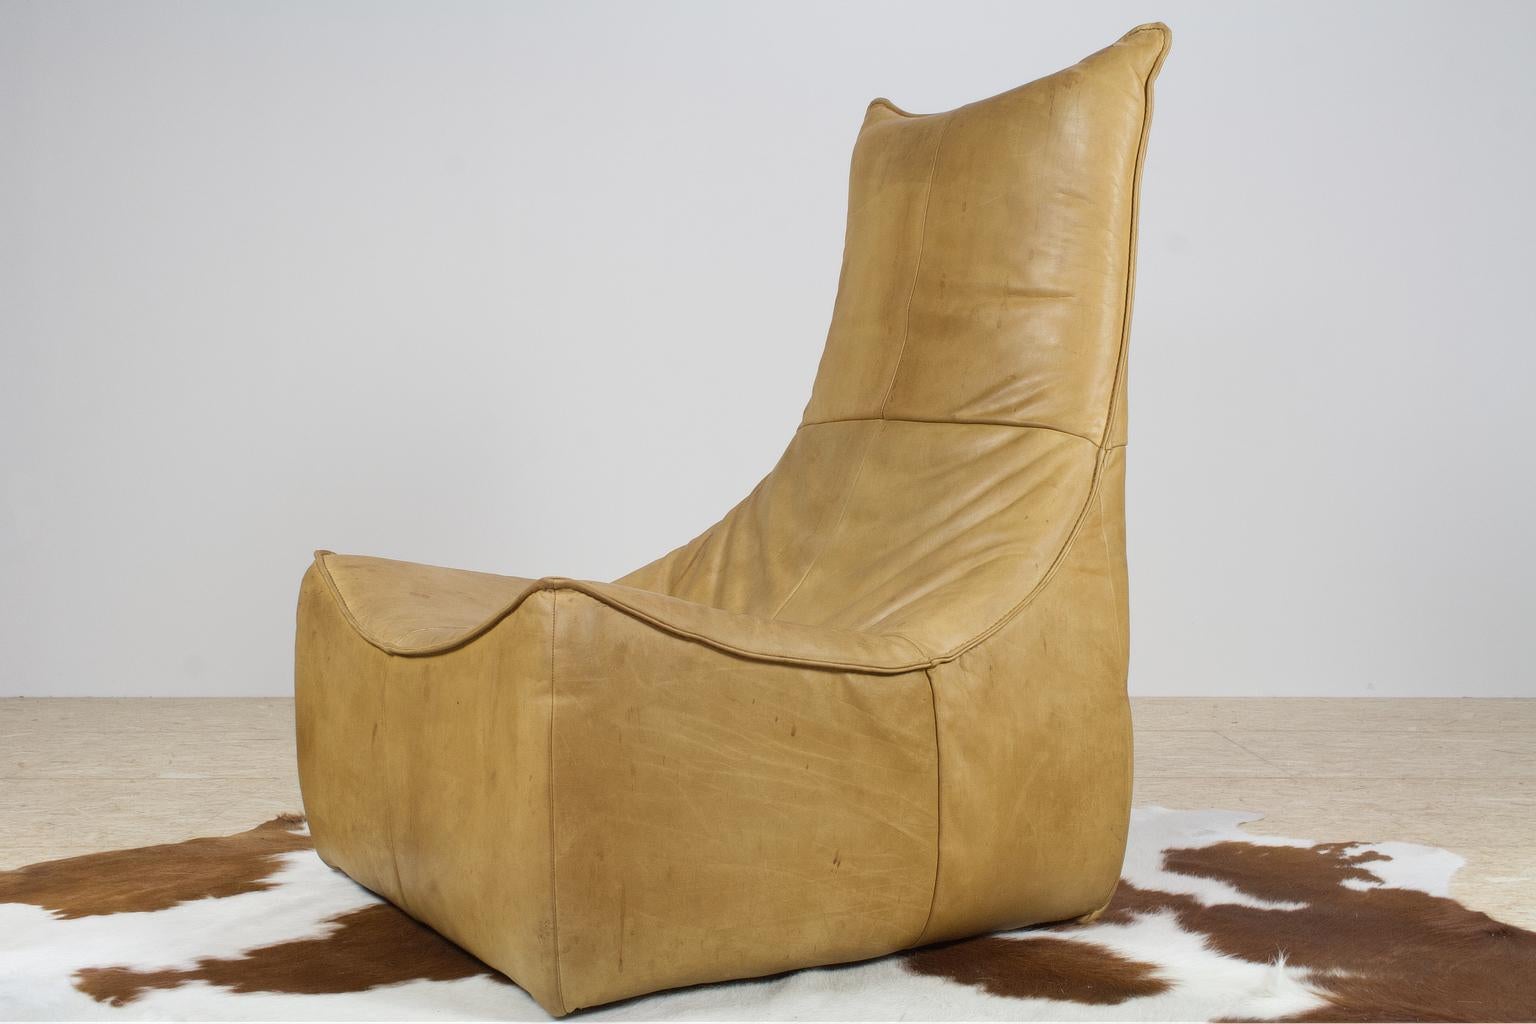 Original, comfortable and large 'Rock' lounge chair in tan or cognac coloured aniline leather, designed by Gerard Van Den Berg for Dutch furniture producer Montis in 1970. Great piece of Brutalist and Modern vintage design. In original condition,